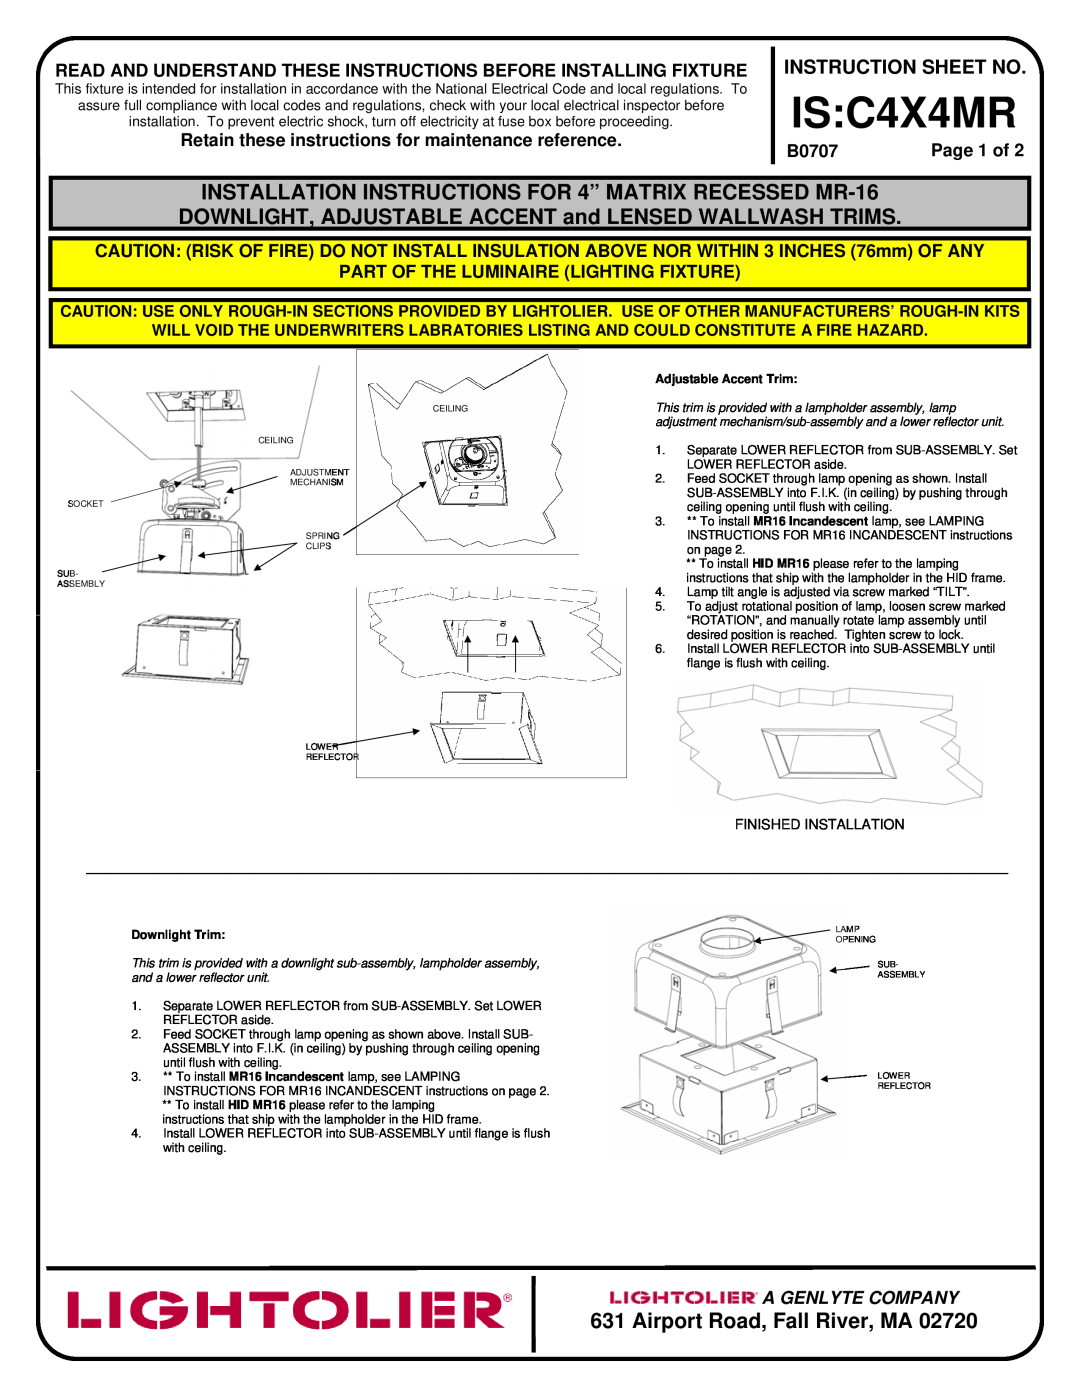 Lightolier installation instructions IS C4X4MR, Airport Road, Fall River, MA, Instruction Sheet No, B0707, Page 1 of 